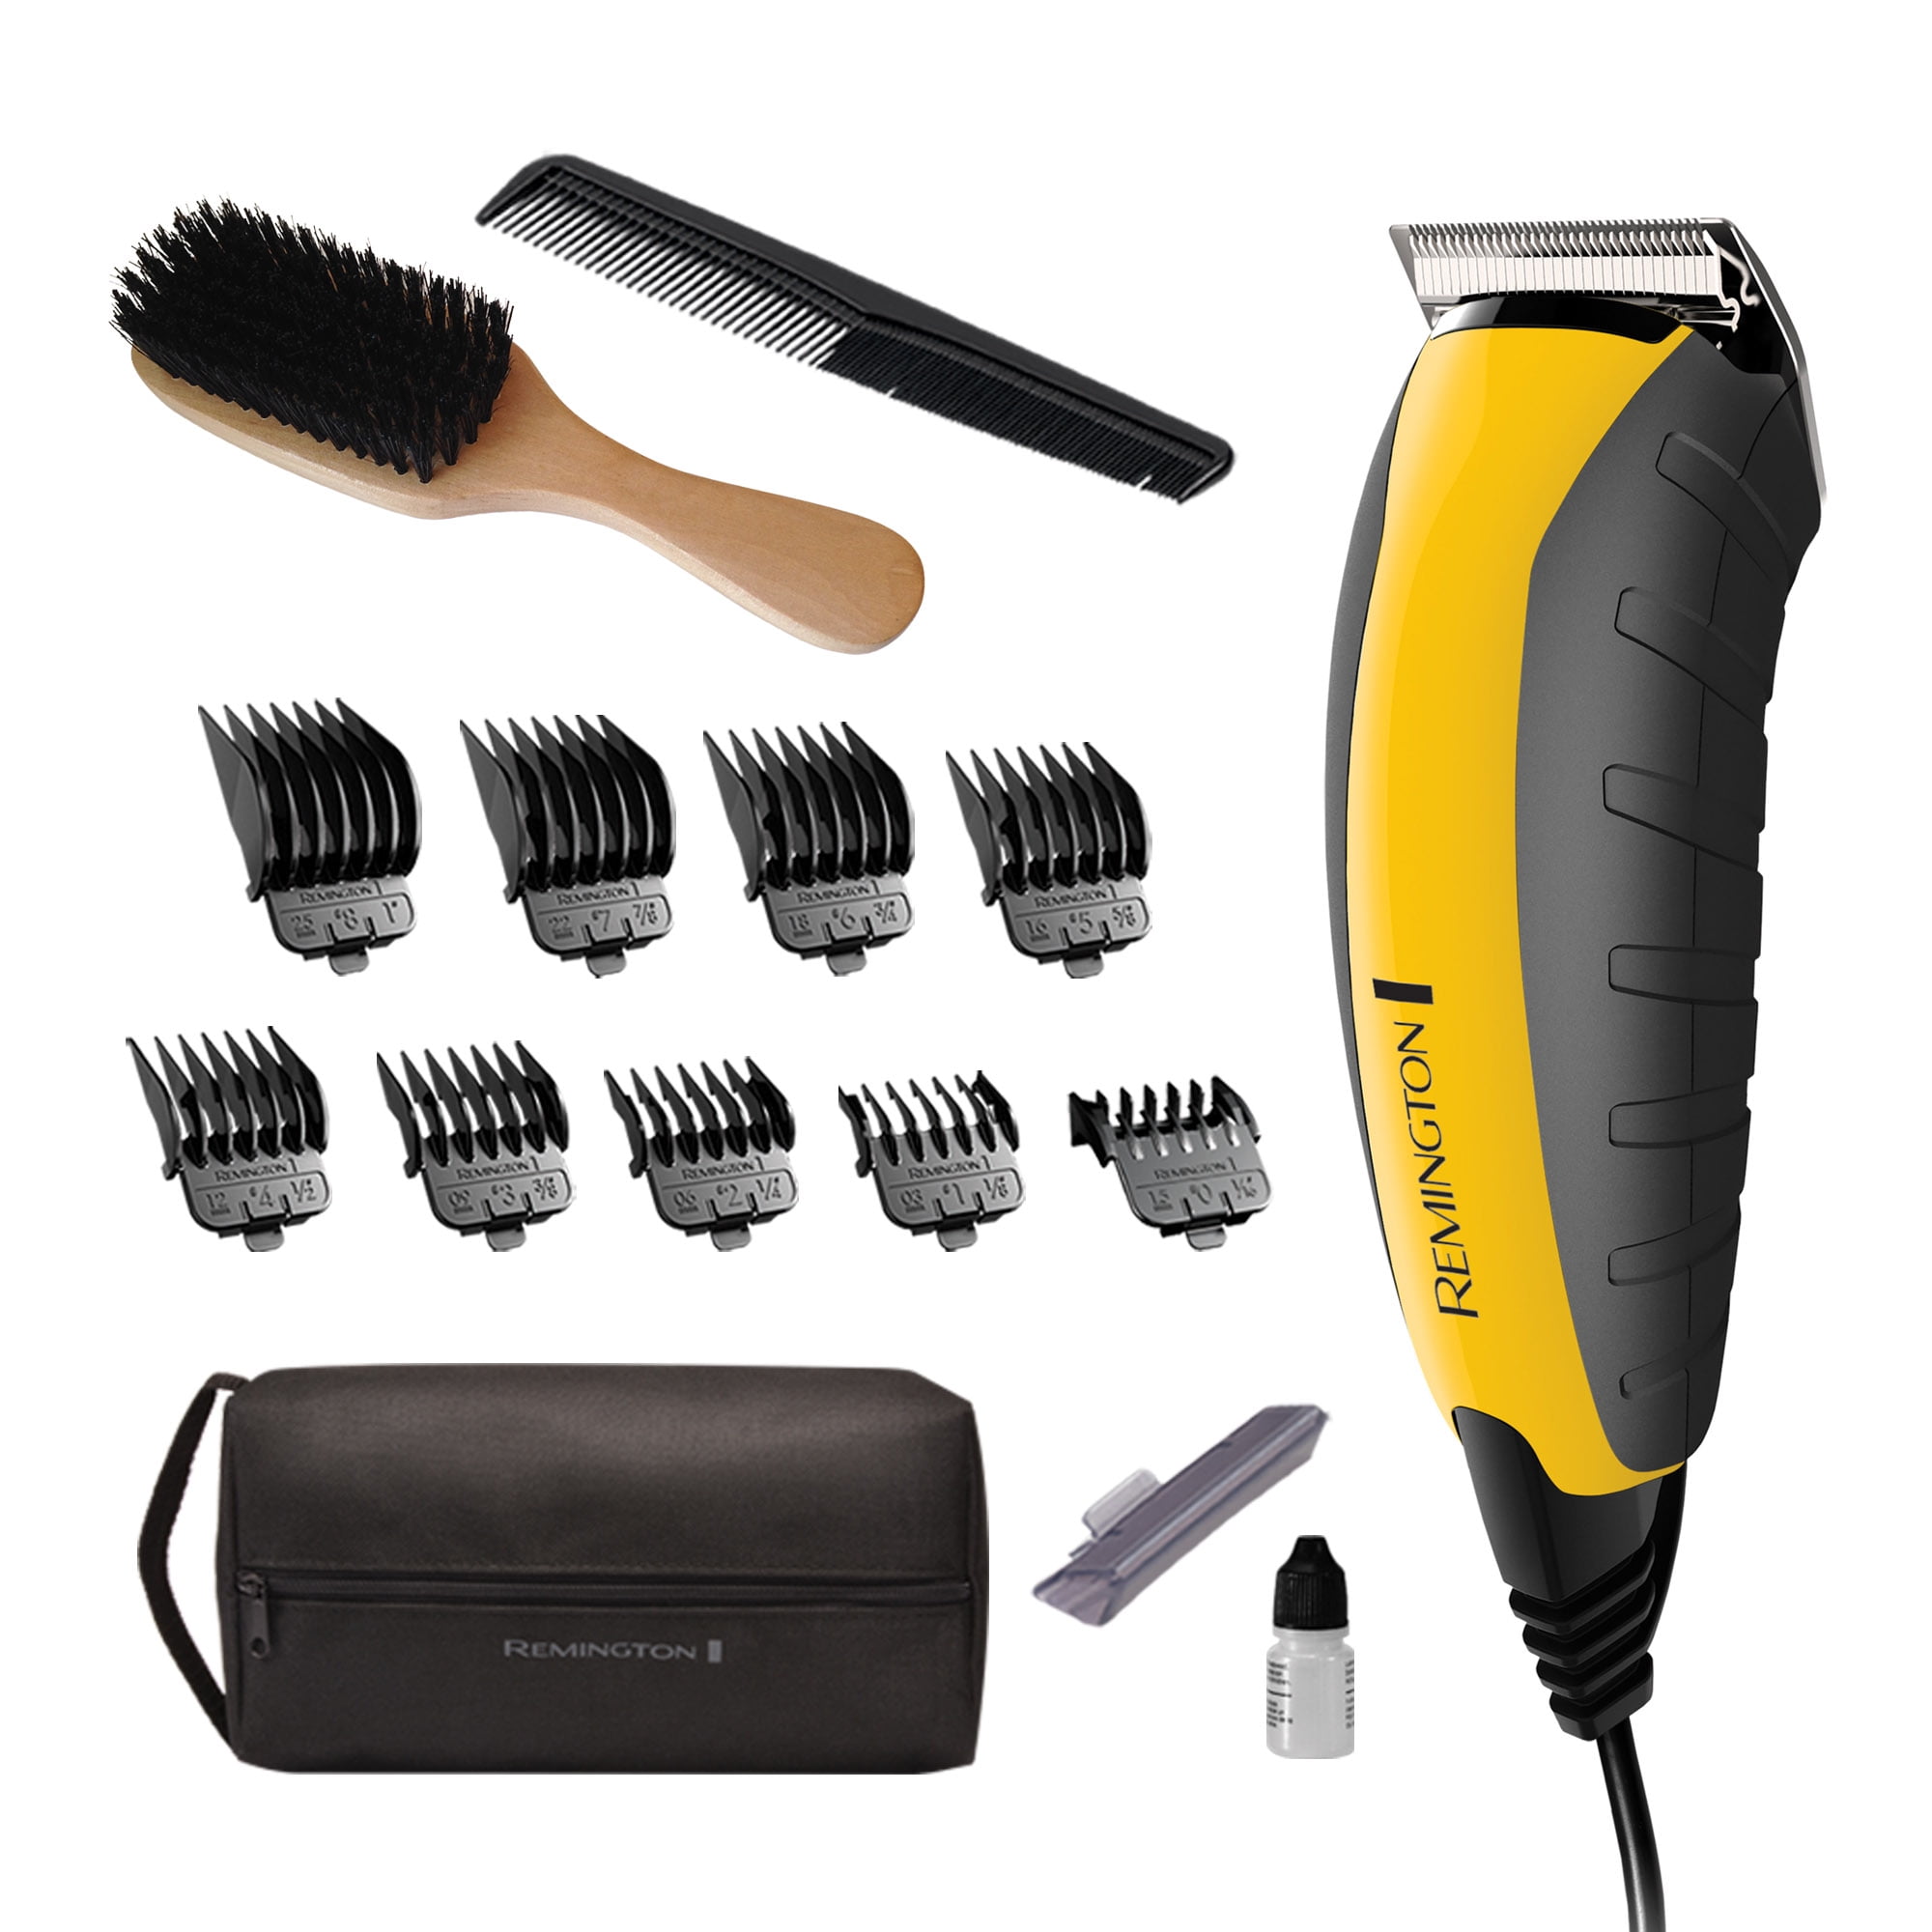 Bottle, Set Male Beard Yellow, Piece Indestructible Virtually Remington Clipper Oil Brush, Combs, Hair with Blade Guard, HC5855 Cutting 15 Kit,